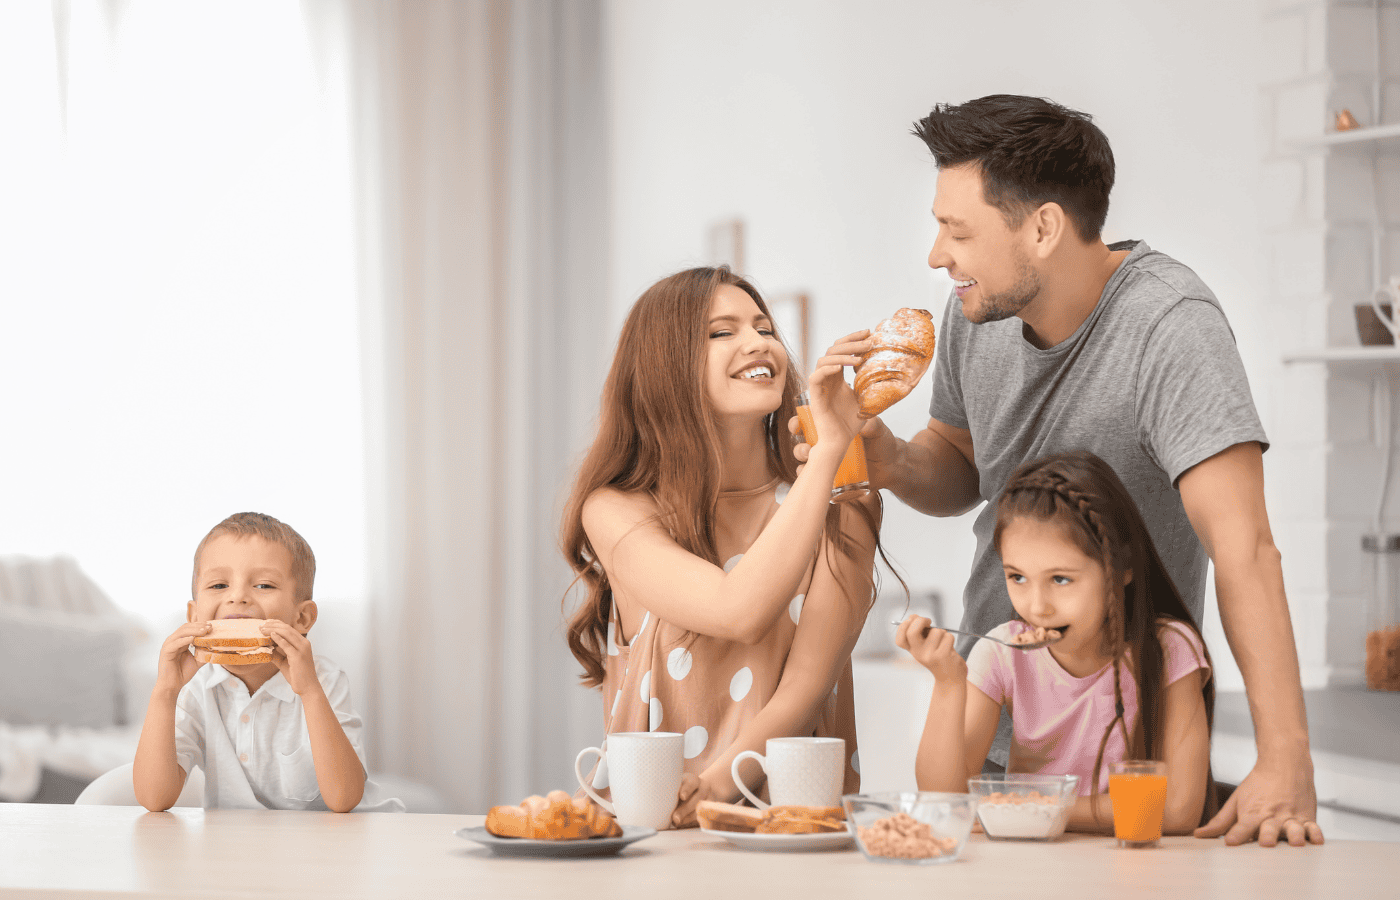 young family enjoying a meal together as some members of the family are vegan and others are meat eaters